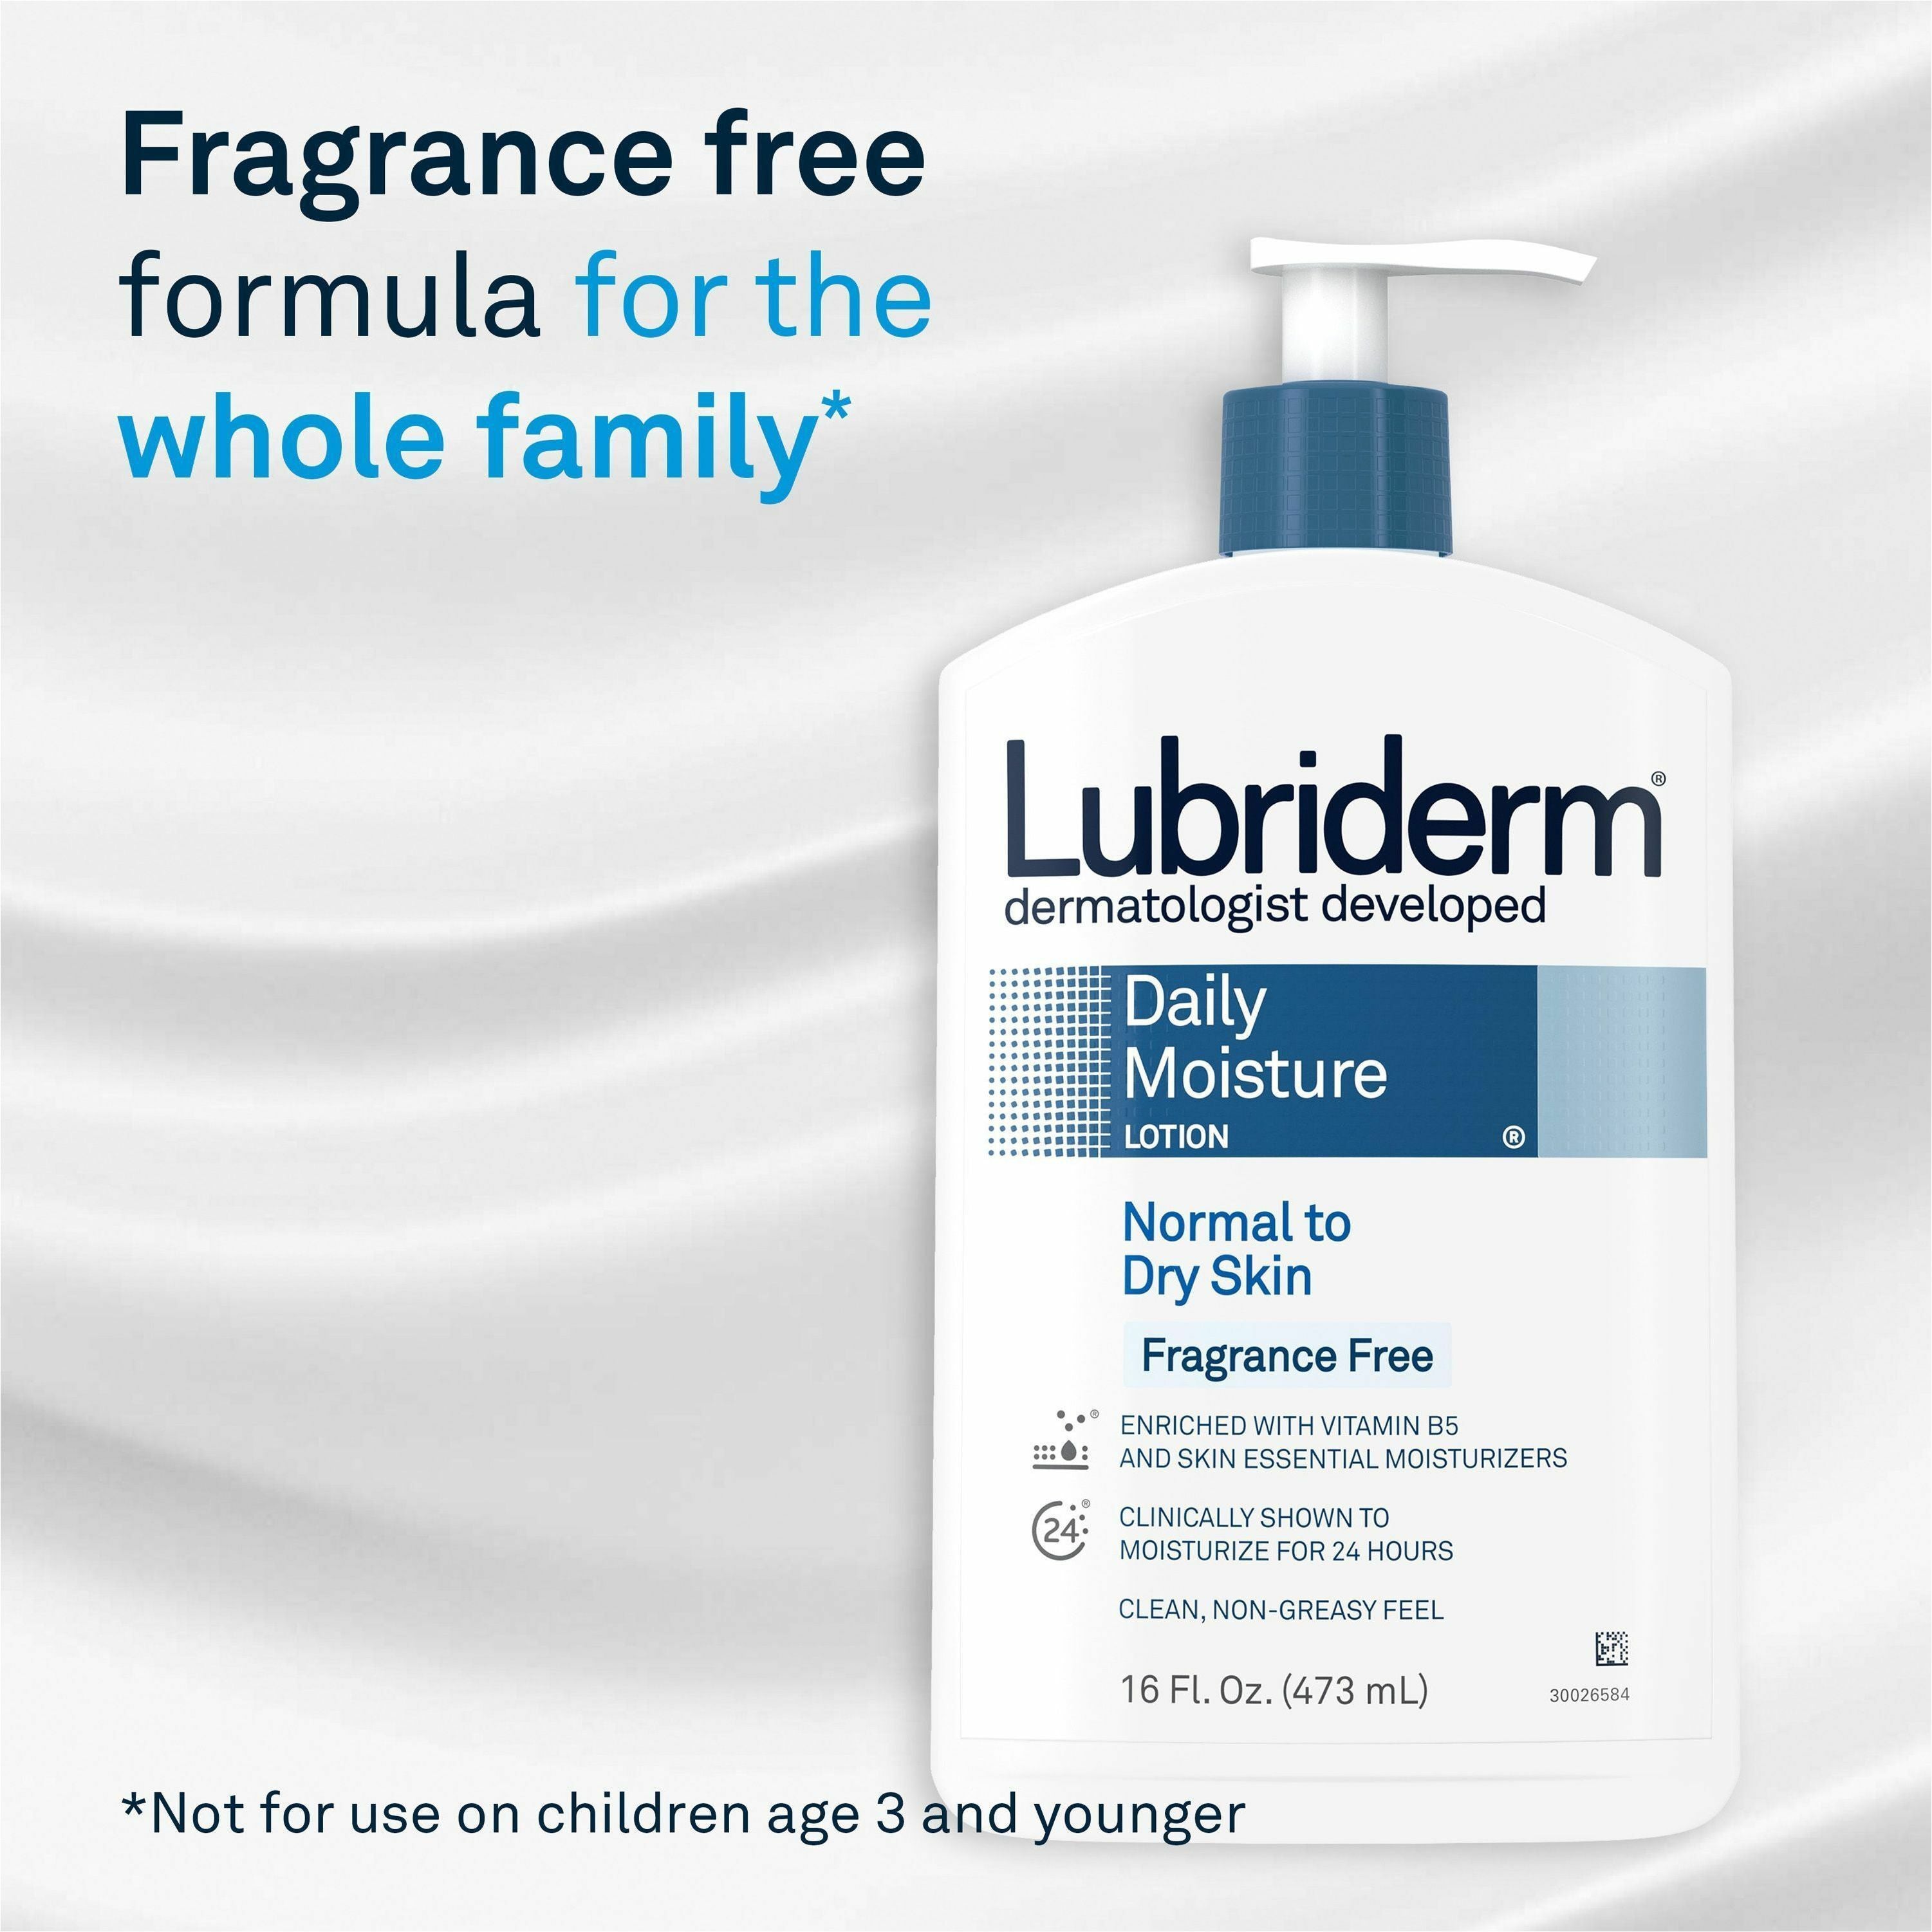 lubriderm-daily-moisture-lotion-lotion-16-fl-oz-for-dry-normal-skin-applicable-on-body-moisturising-non-greasy-fragrance-free-absorbs-quickly-12-carton_joj48323ct - 3